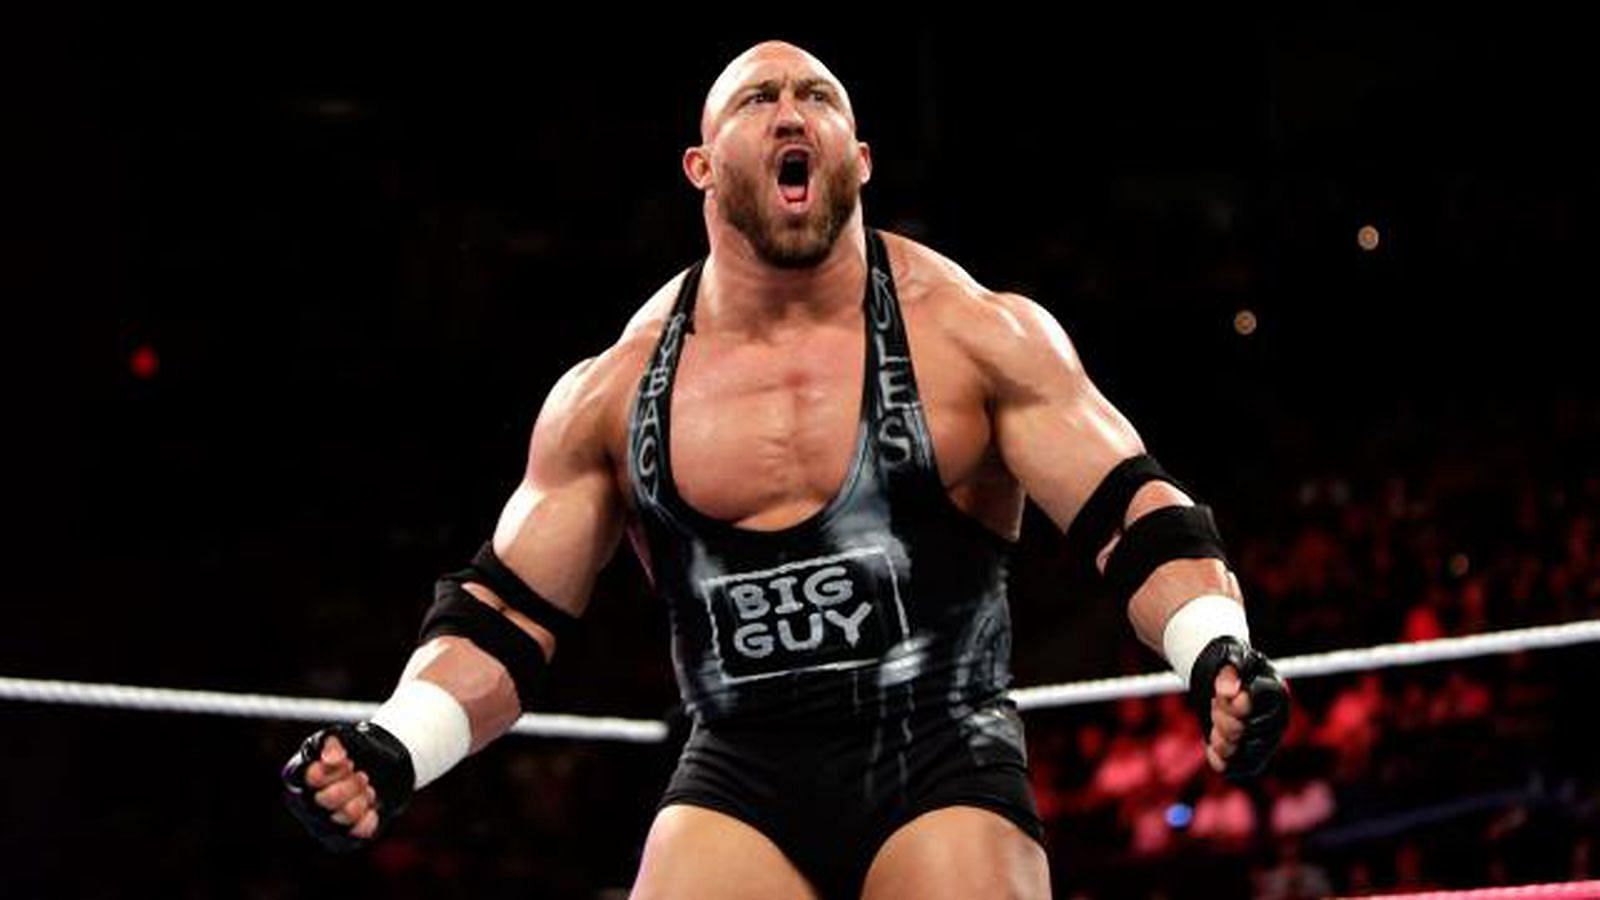 Ryback comments on the only WWE Superstar to kick out of his finisher